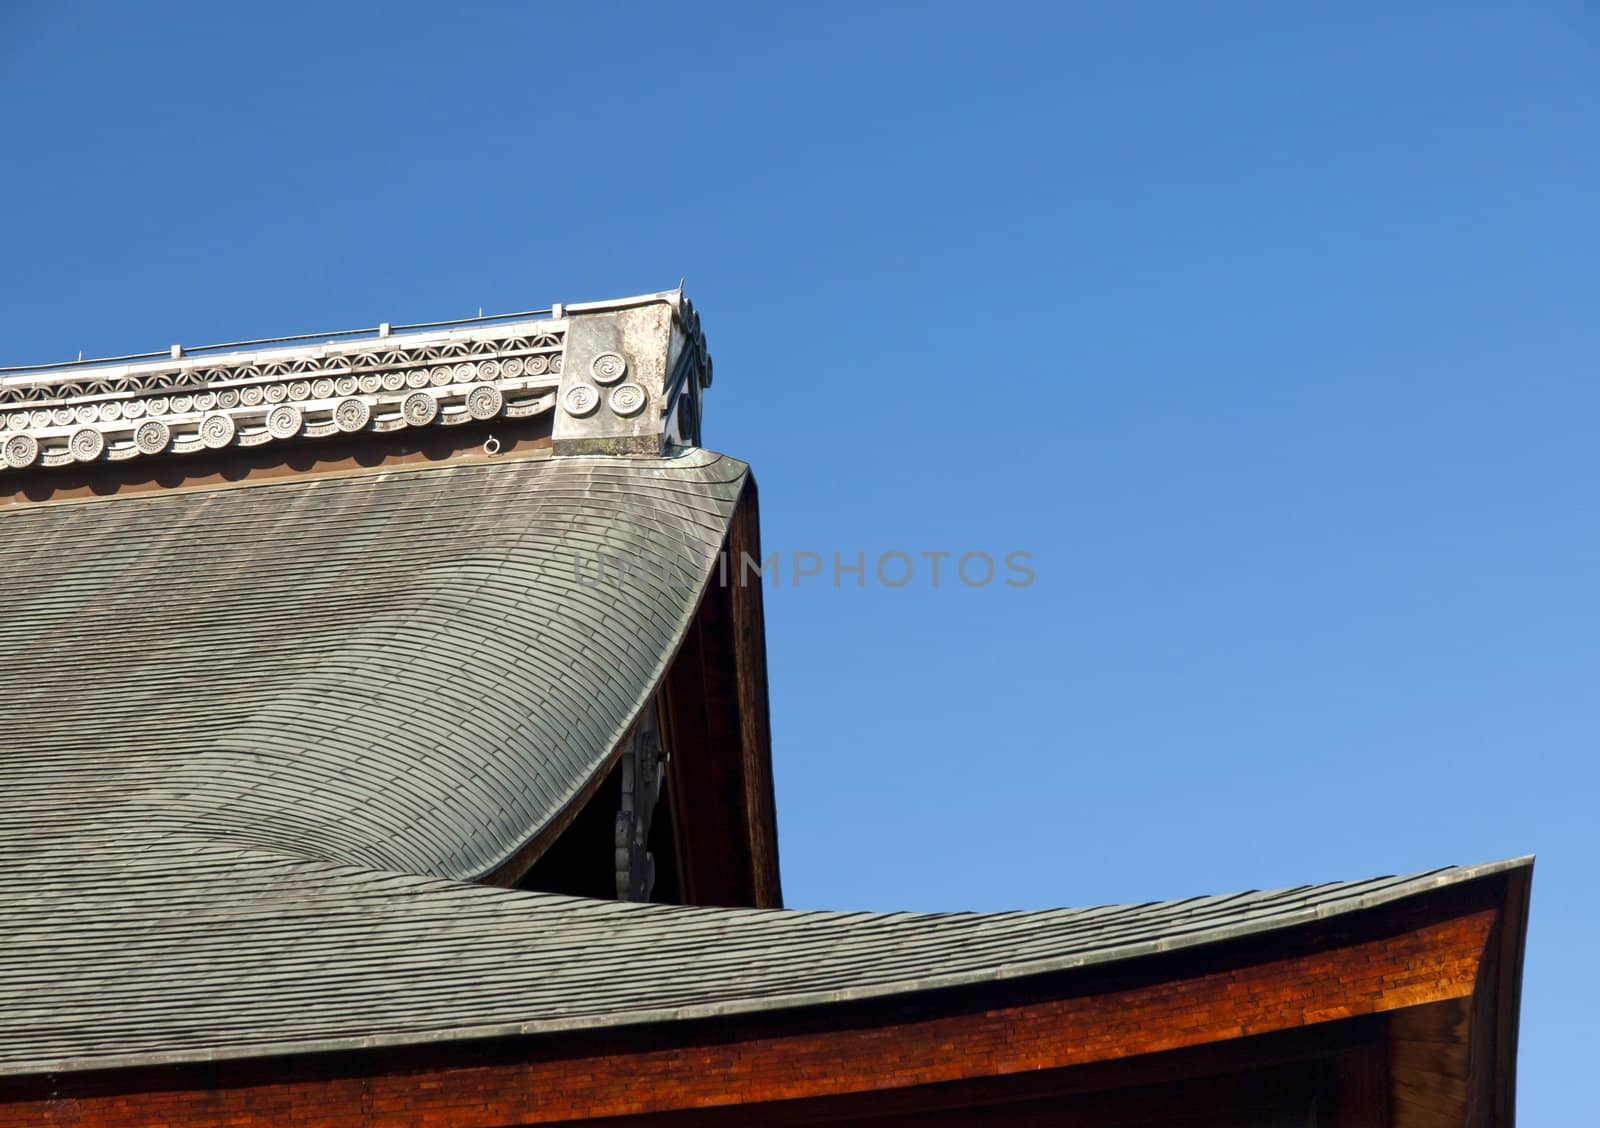 Details of the roof of japanese temple in Tenryu-ji temple in Kyoto, Japan